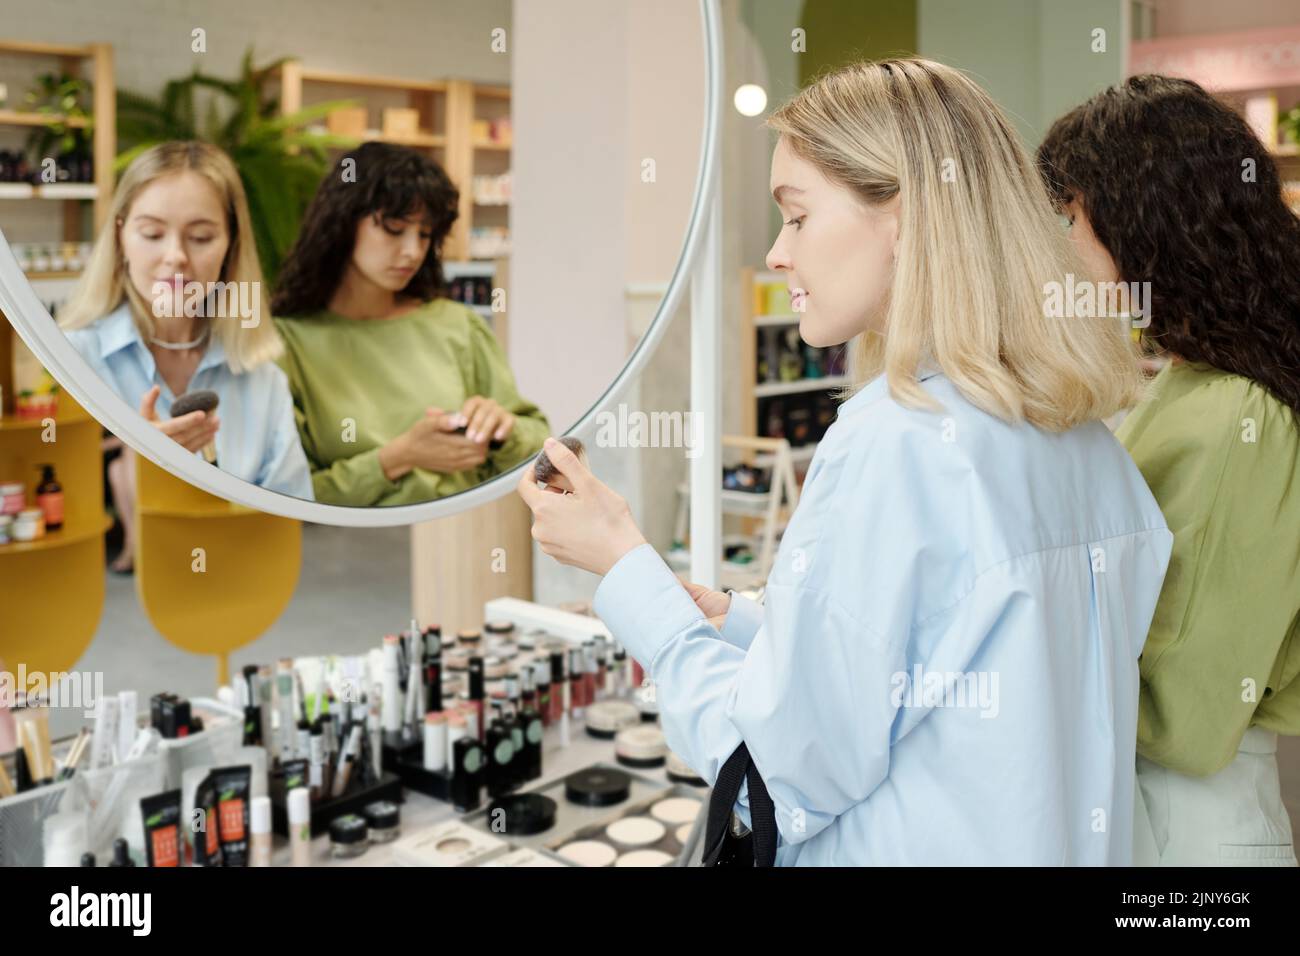 Young blond female shopper holding powder brush while choosing accessories for makeup in front of mirror and display Stock Photo